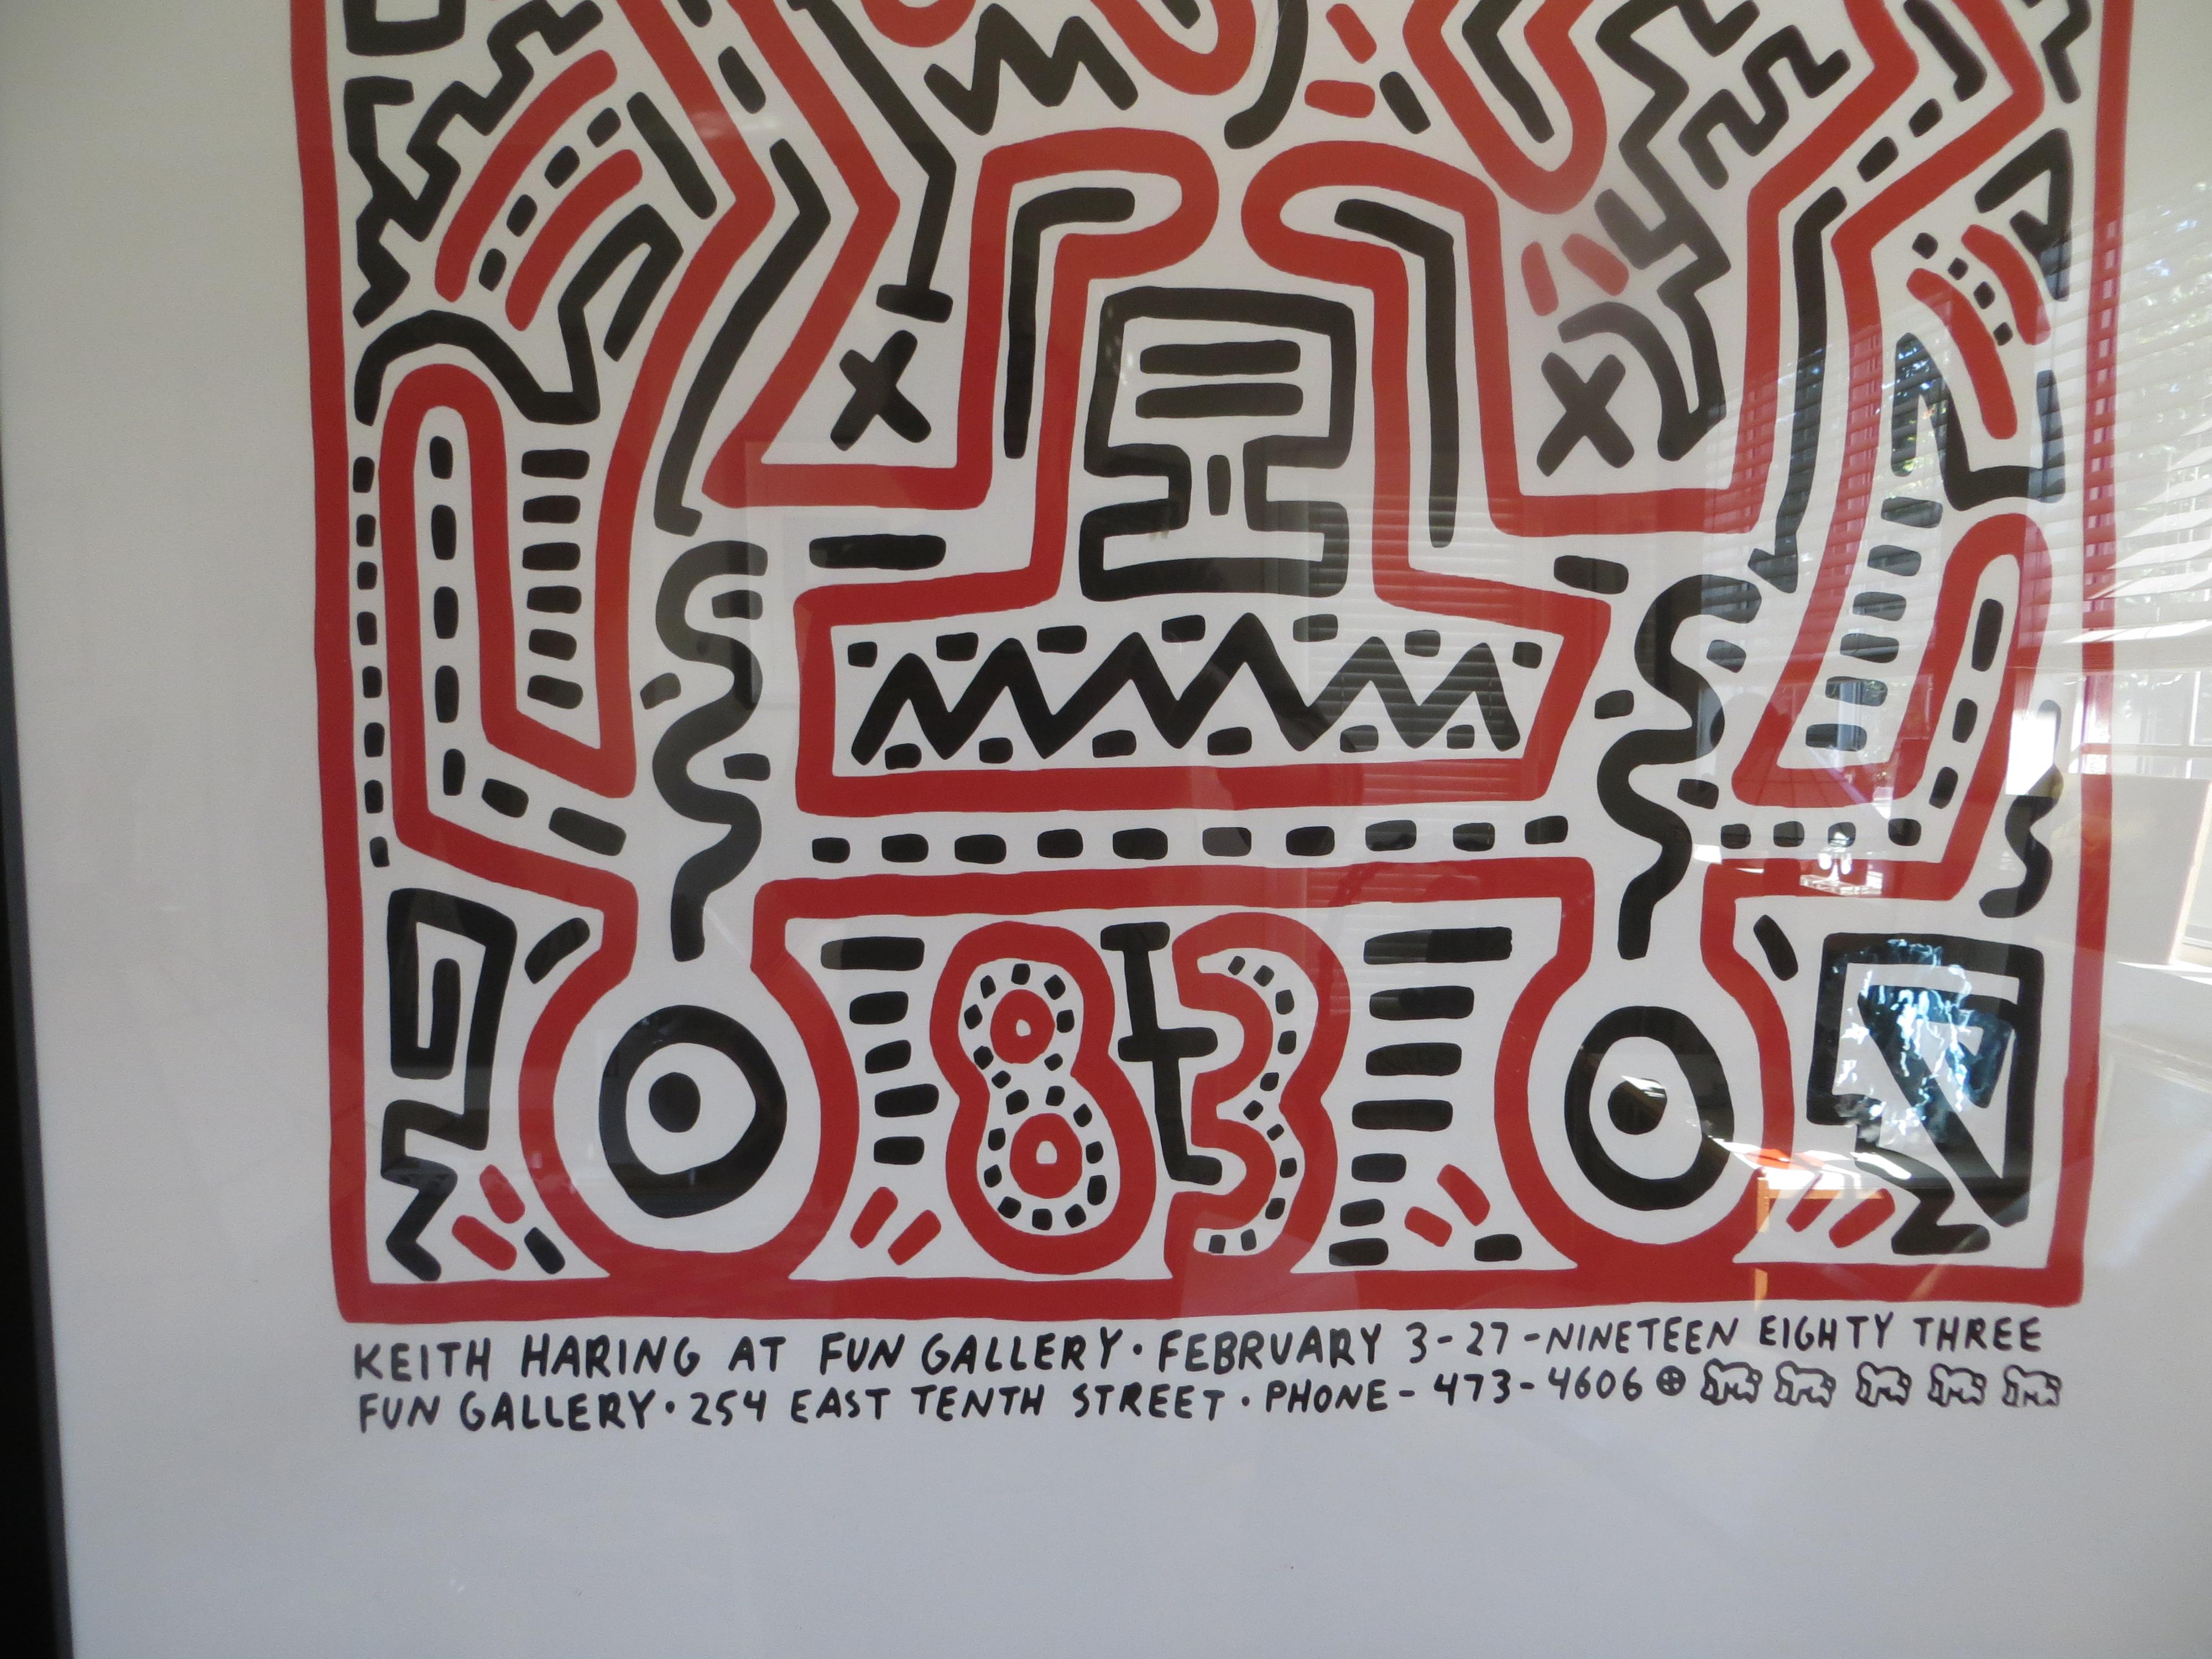 Fun Gallery Exhibition 1983  by Keith Haring Screen Print  1